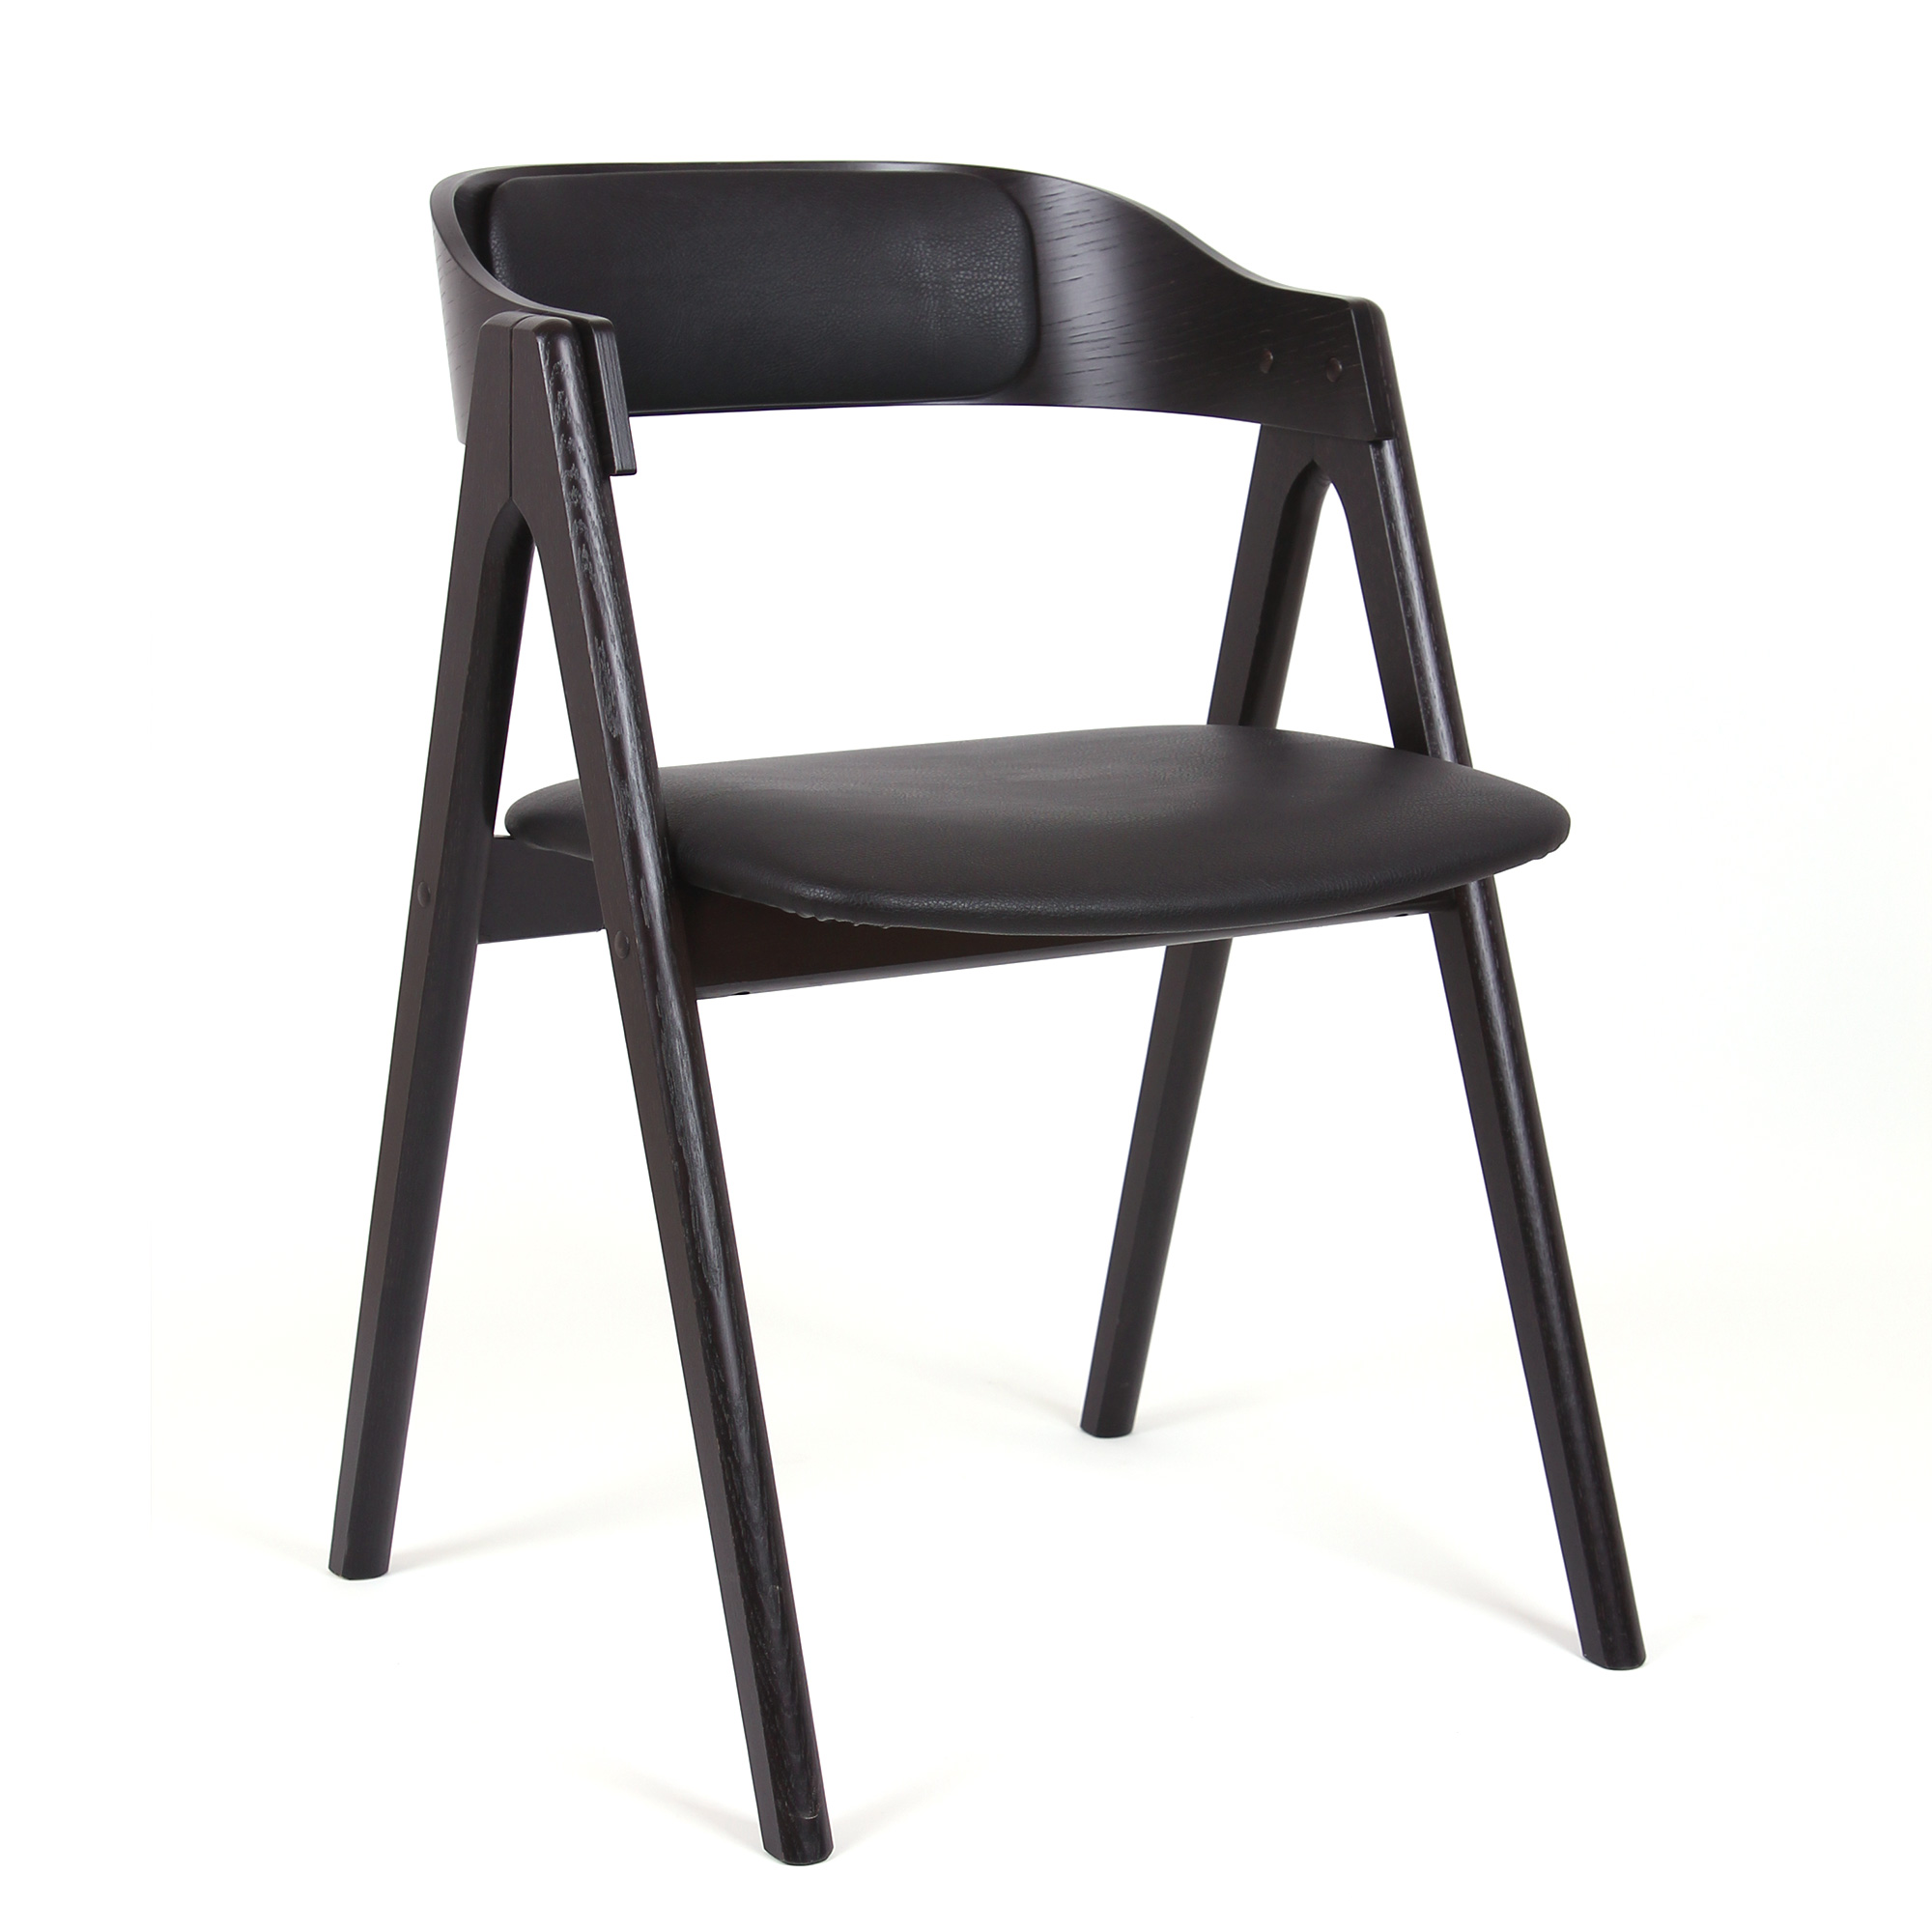 Mette Dining Chair by Carsten Buhl for Findahls Møbelfabrik